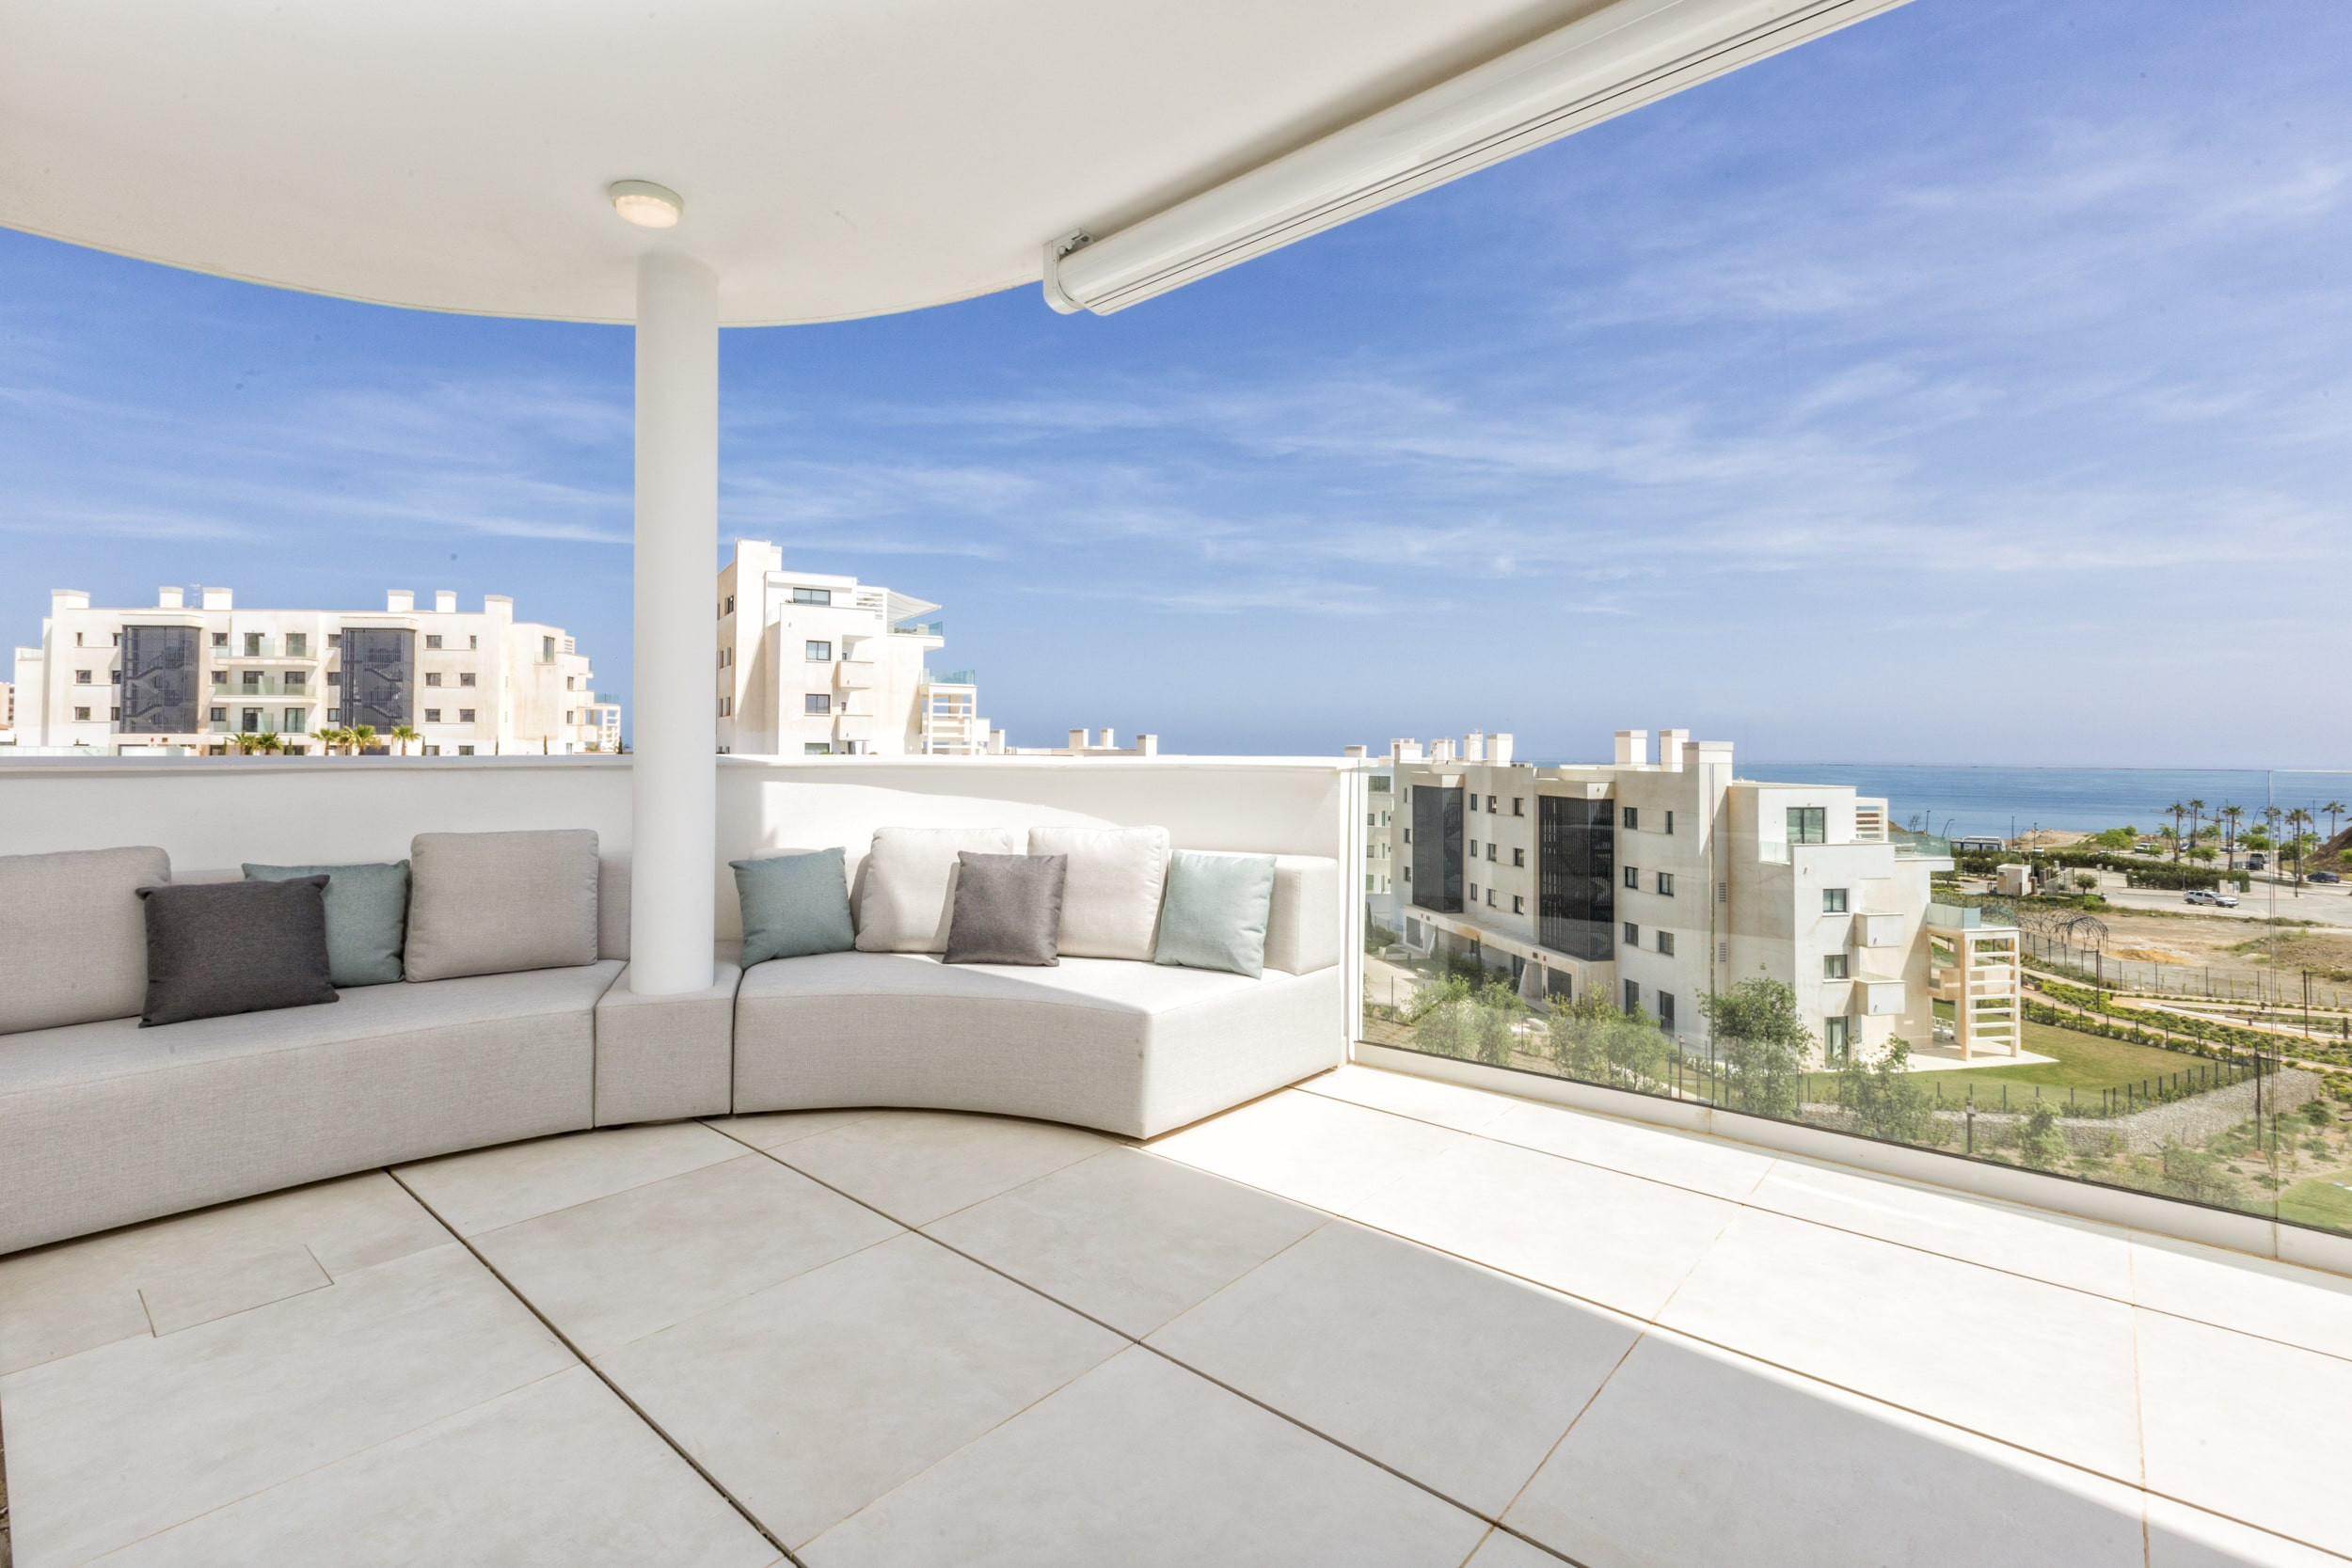 WintowinRentals Relax & Frontal Sea View Apartment in Fuengirola.